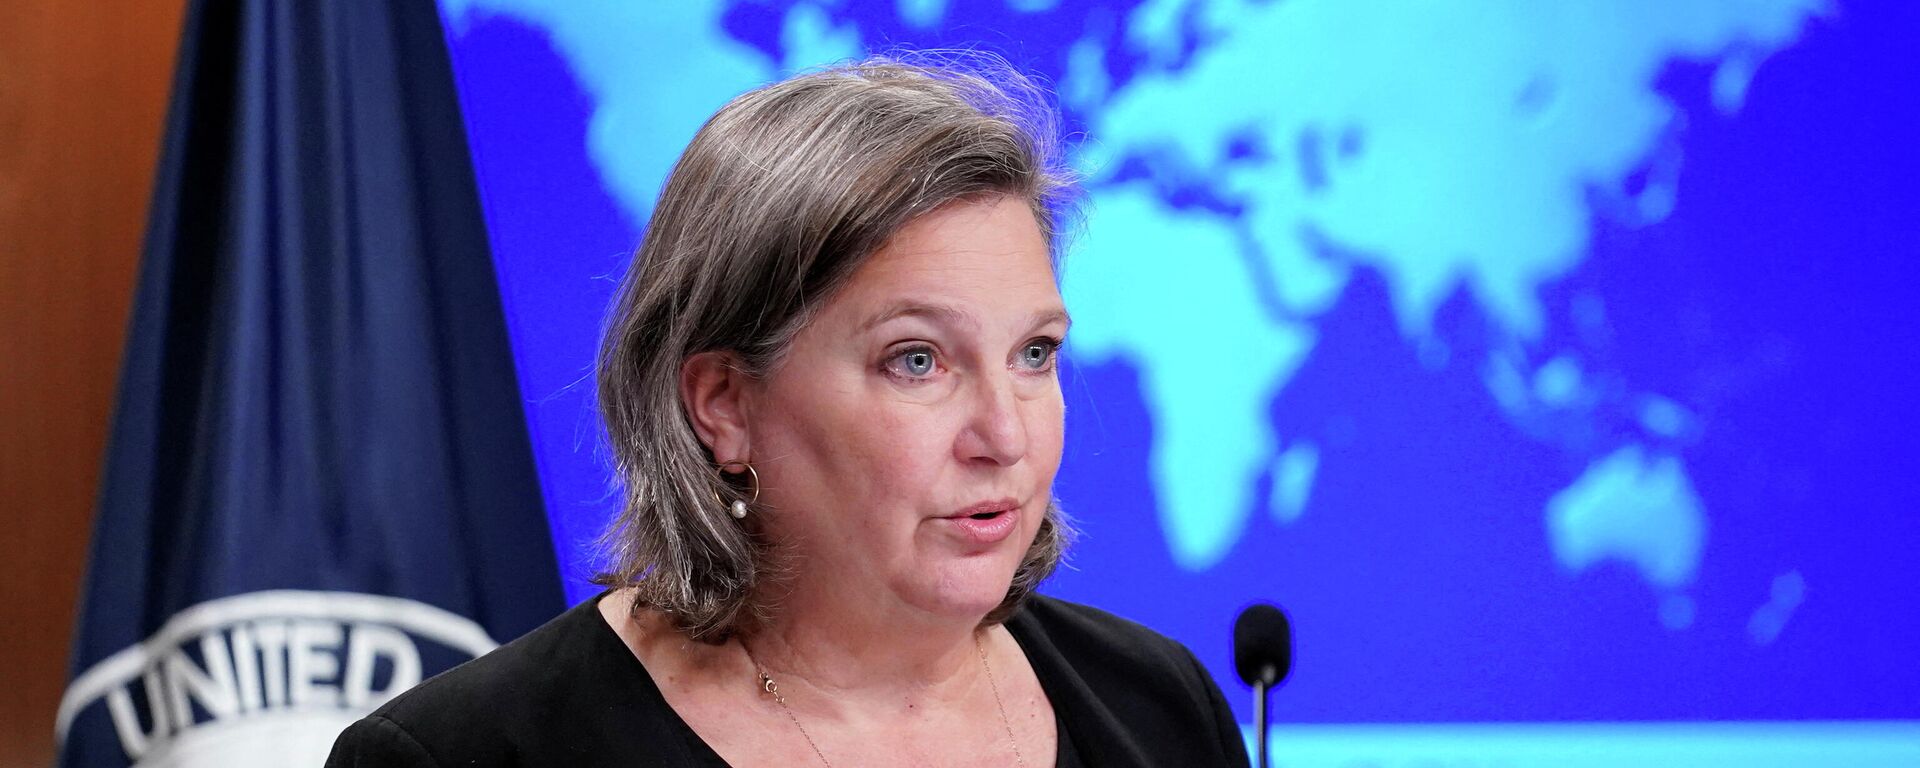 U.S. State Department Under Secretary for Public Affairs Victoria Nuland speaks during a briefing at the State Department in Washington, U.S., January 27, 2022 - Sputnik International, 1920, 27.01.2022